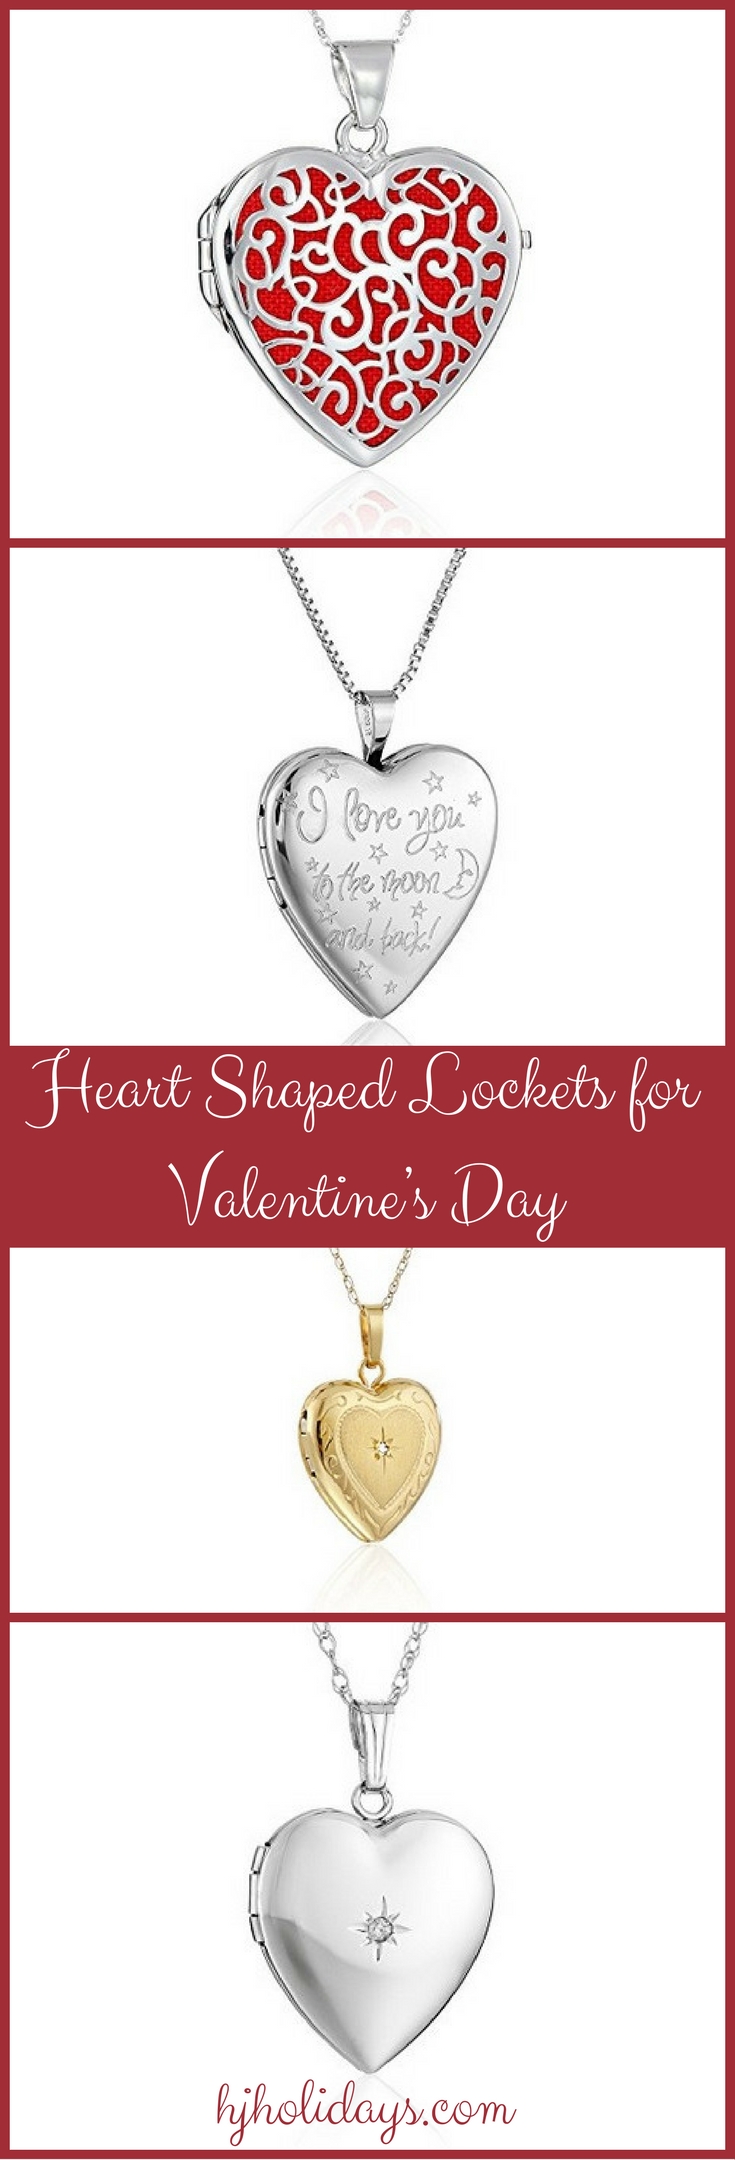 Heart Shaped Locket for Valentines Day